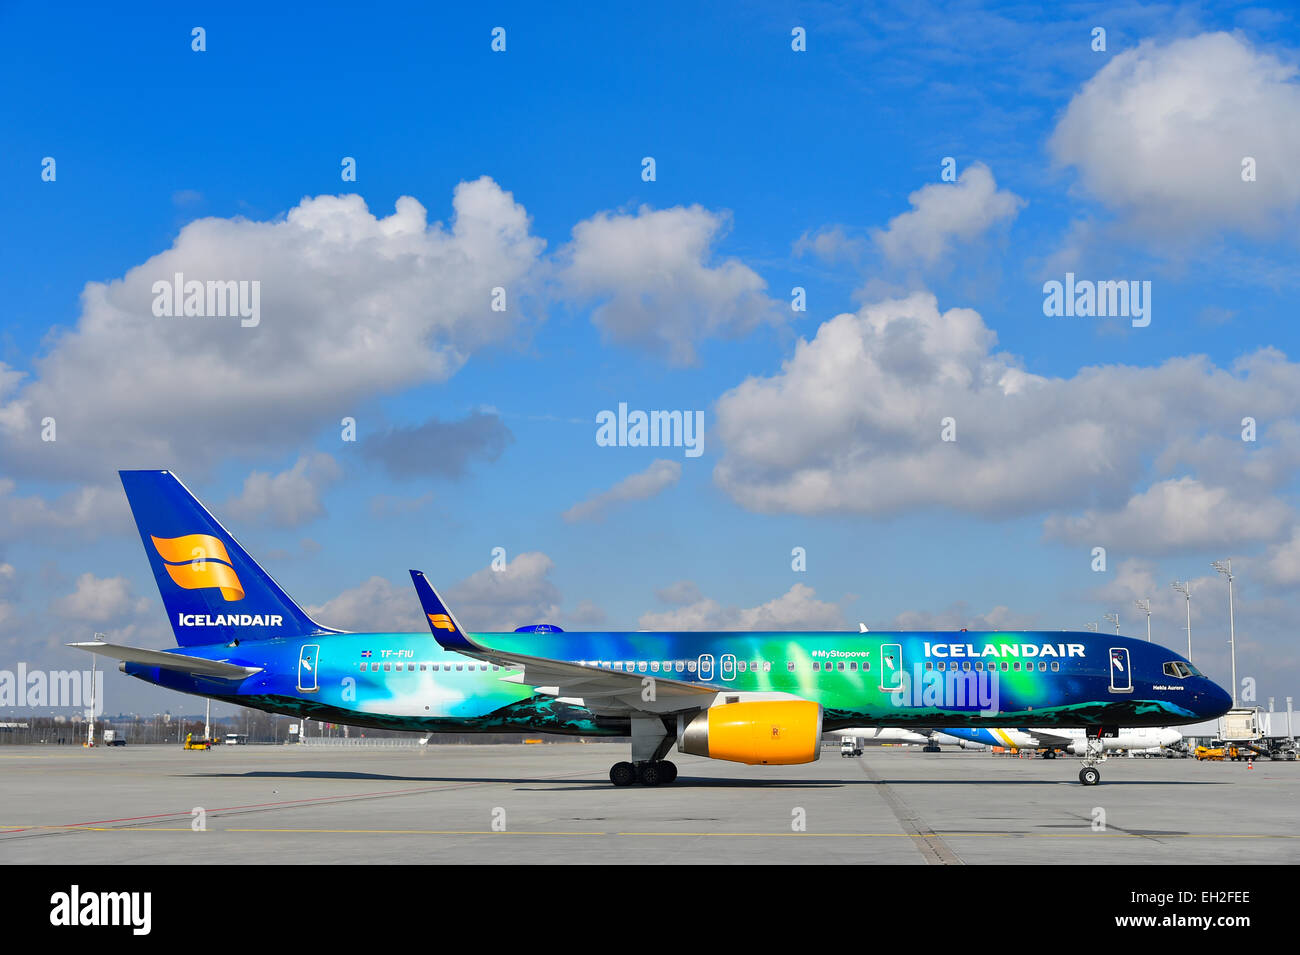 iceland air, icelandair, boeing, b 757, special Northern Lights color scheme, aircraft, airplane, plane, Stock Photo